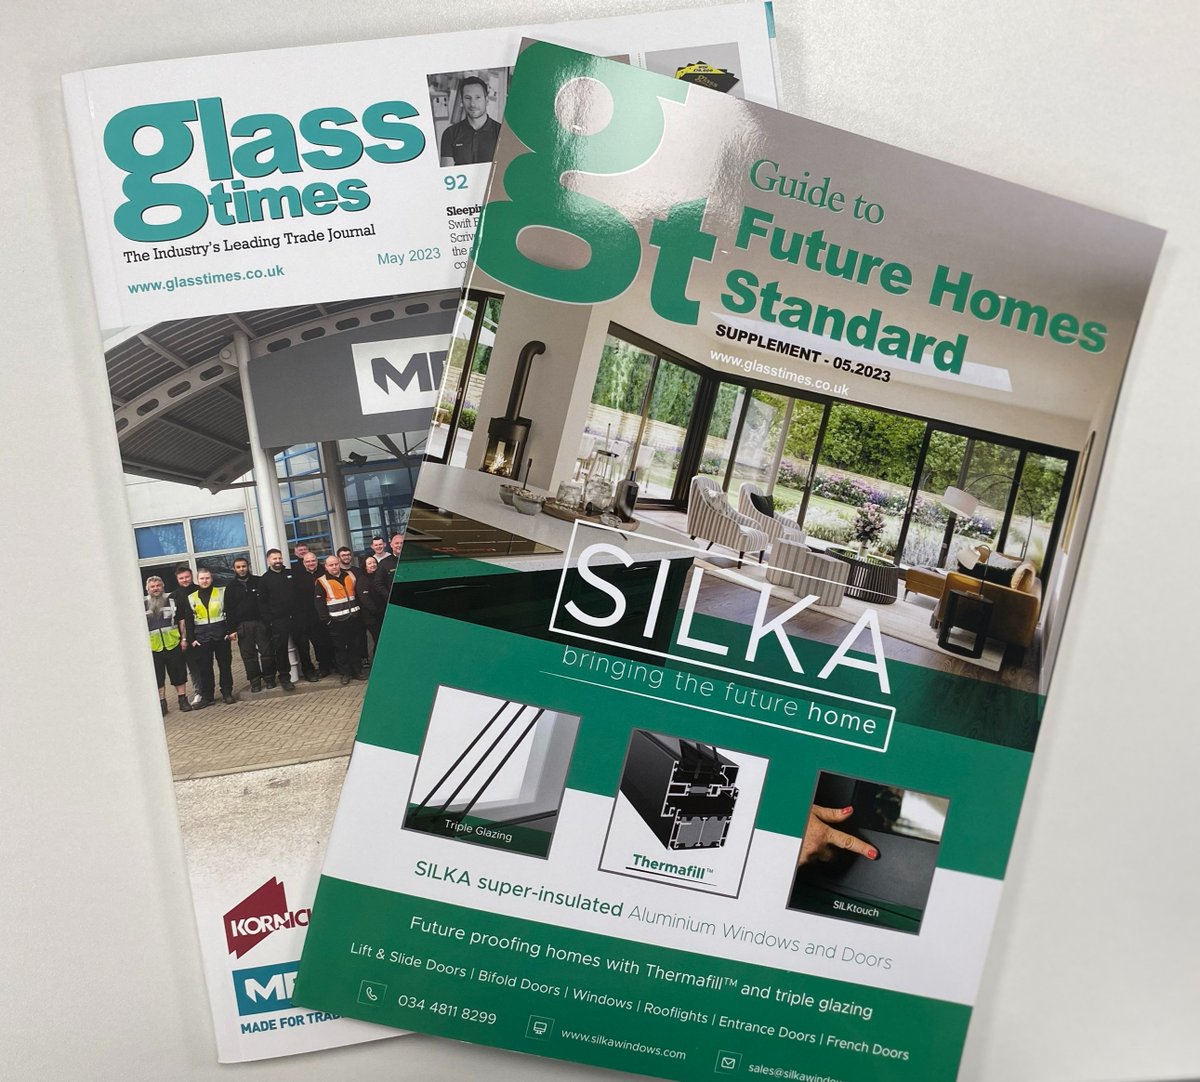 Did you catch us on the cover of @glasstimes Guide to Future Homes Standard🏡 Check out page 20 to discover how we can help you stay one step ahead in the industry with innovative solutions.

#Silka #FutureHomesStandard #InnovativeSolutions #IndustryLeadership #StayAhead